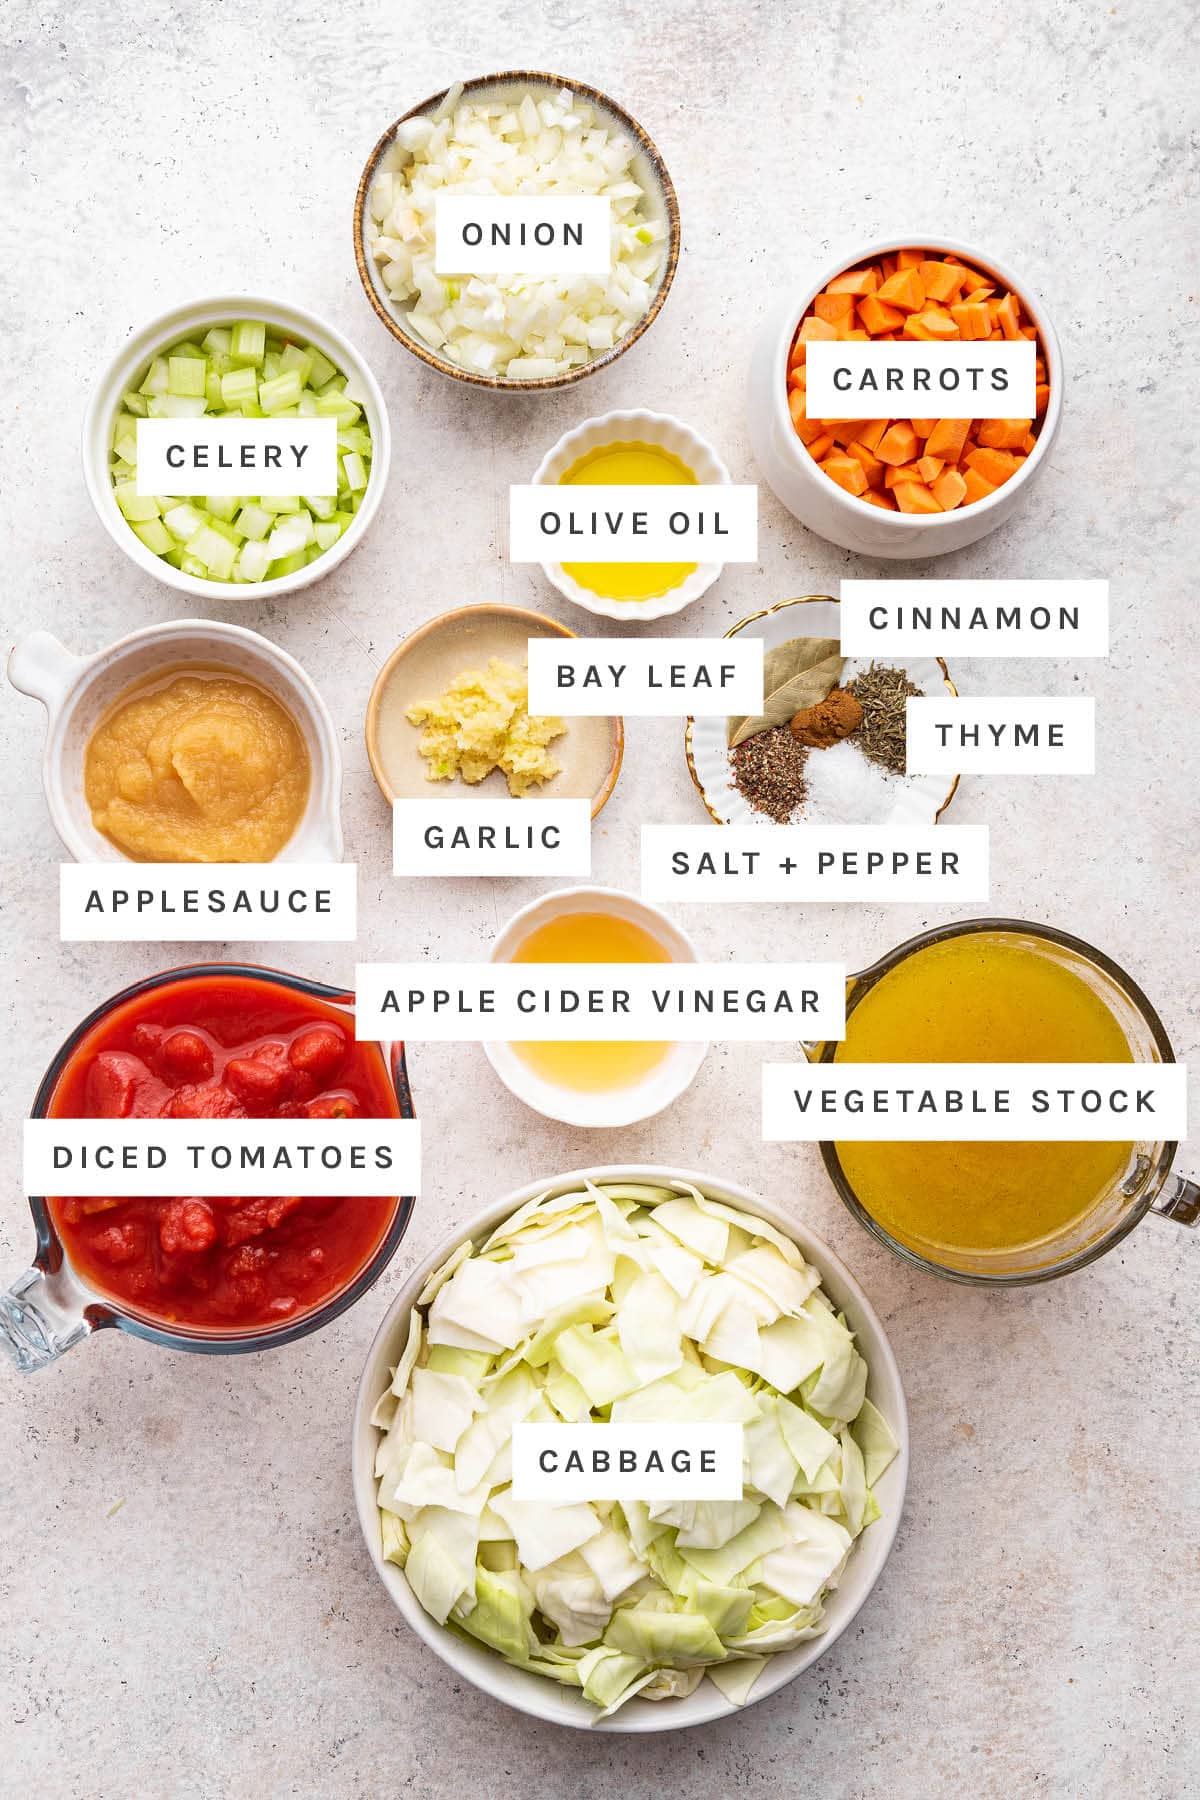 Ingredients measured out to make cabbage soup: applesauce, garlic, salt, pepper, bay leaf, thyme, diced tomatoes, onion, olive oil, cinnamon, vegetable stock, cabbage, carrots, celery and apple cider vinegar.